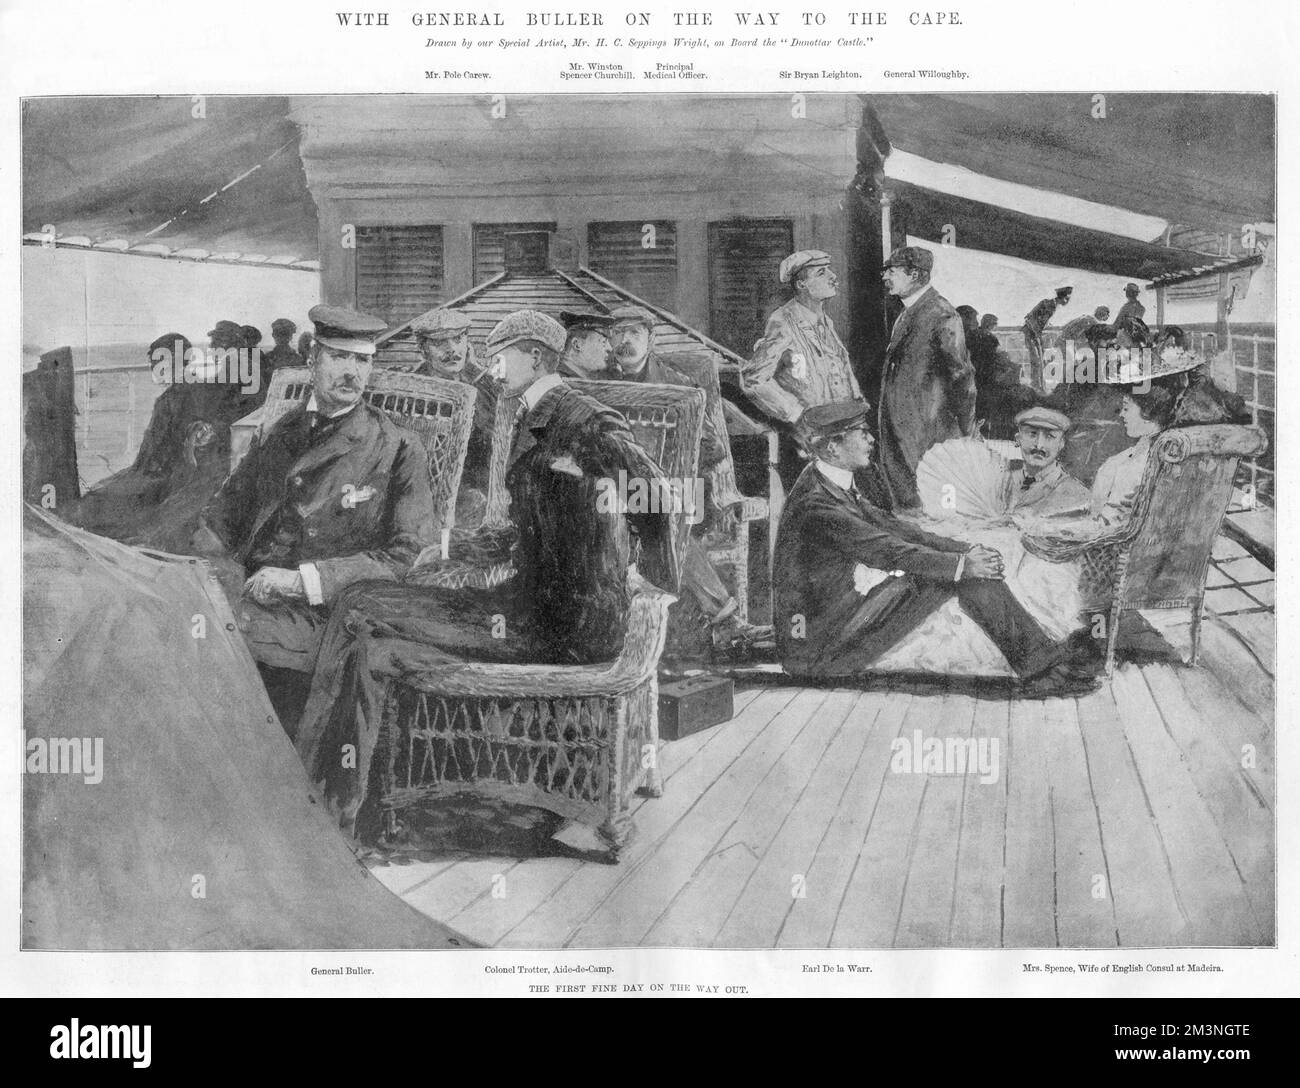 A scene on board the Donottar Castle, the ship transporting General Sir Redvers Buller to the Cape during the Transvaal (Boer) War.  Buller is pictured seated far left, speaking to his ADC, Colonel Trotter and behind them is Mr Pole Carew and Mr Winston Spencer Churchill.  Others include Sir Bryan Leighton, General Willoughby, Earl De la Warr and Mrs Spence, wife of the English consul at Madeira.    1899 Stock Photo